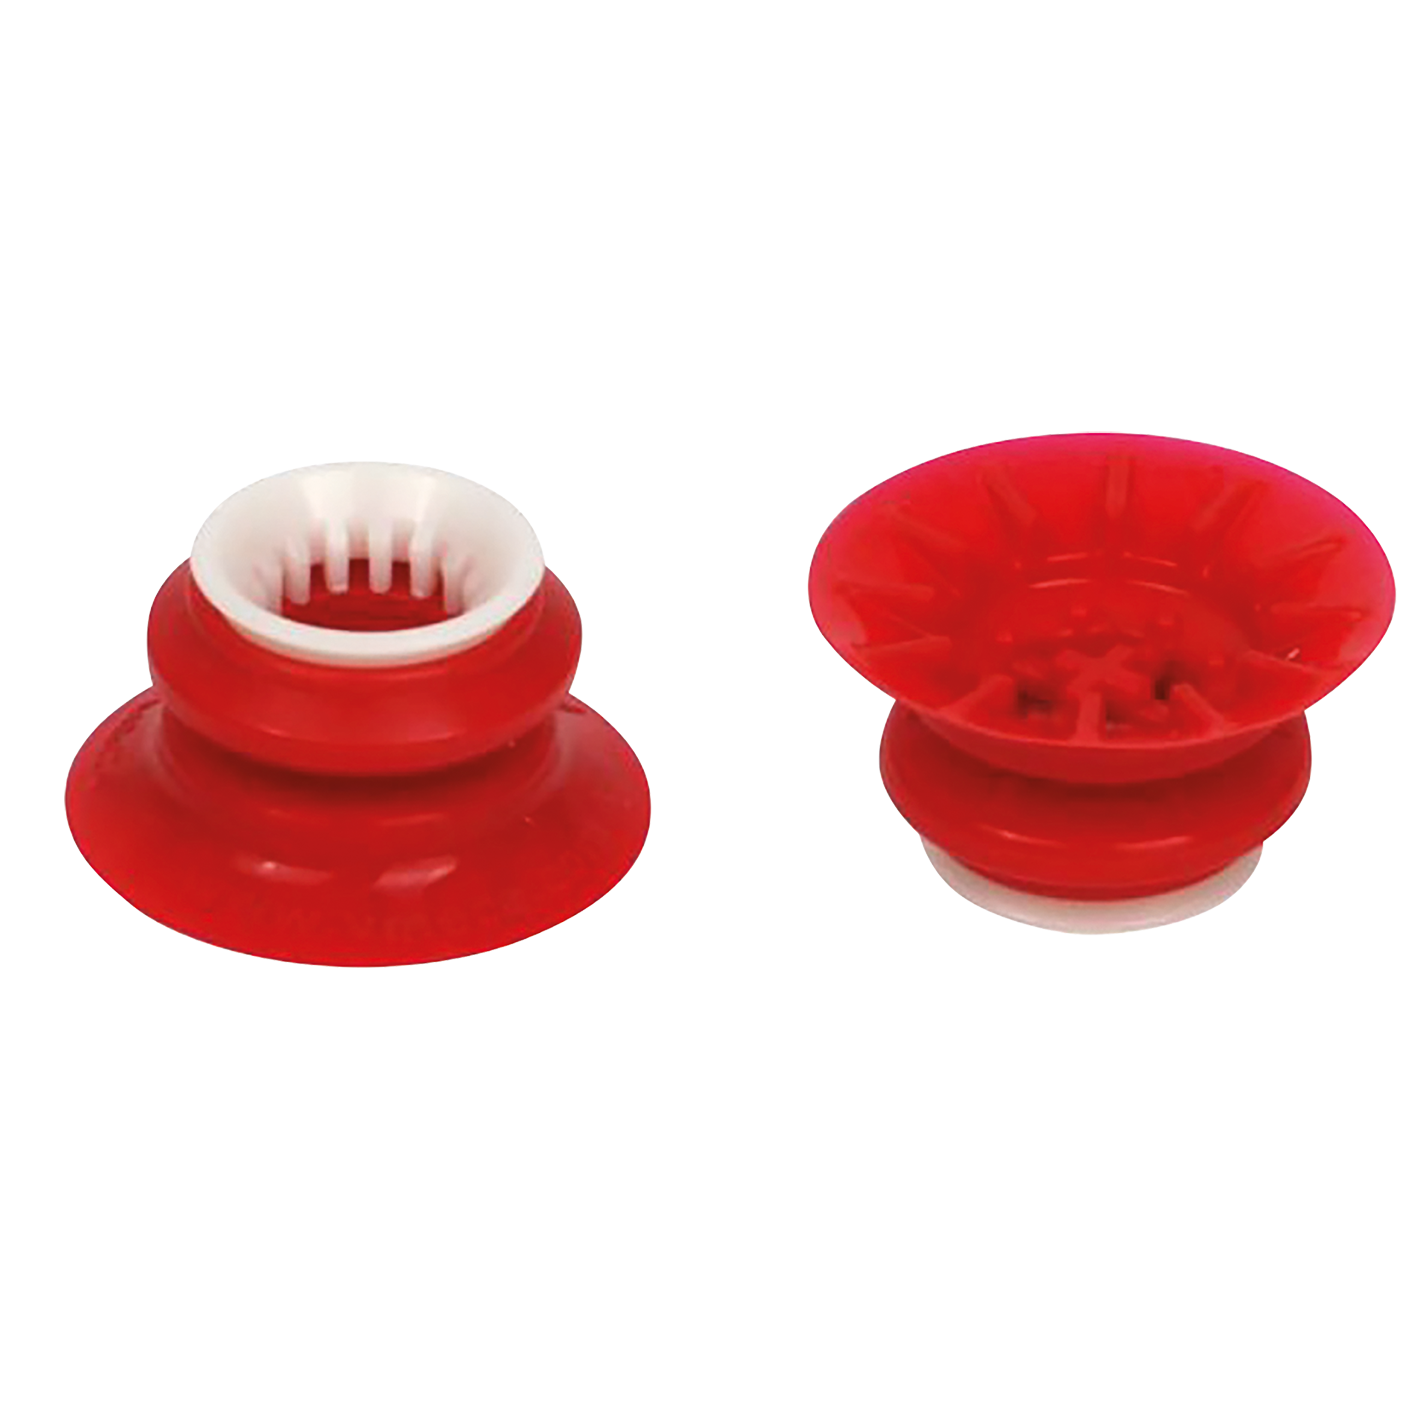 SUCTION LIP FOR P TYPE CUP 20MM DIAMETER